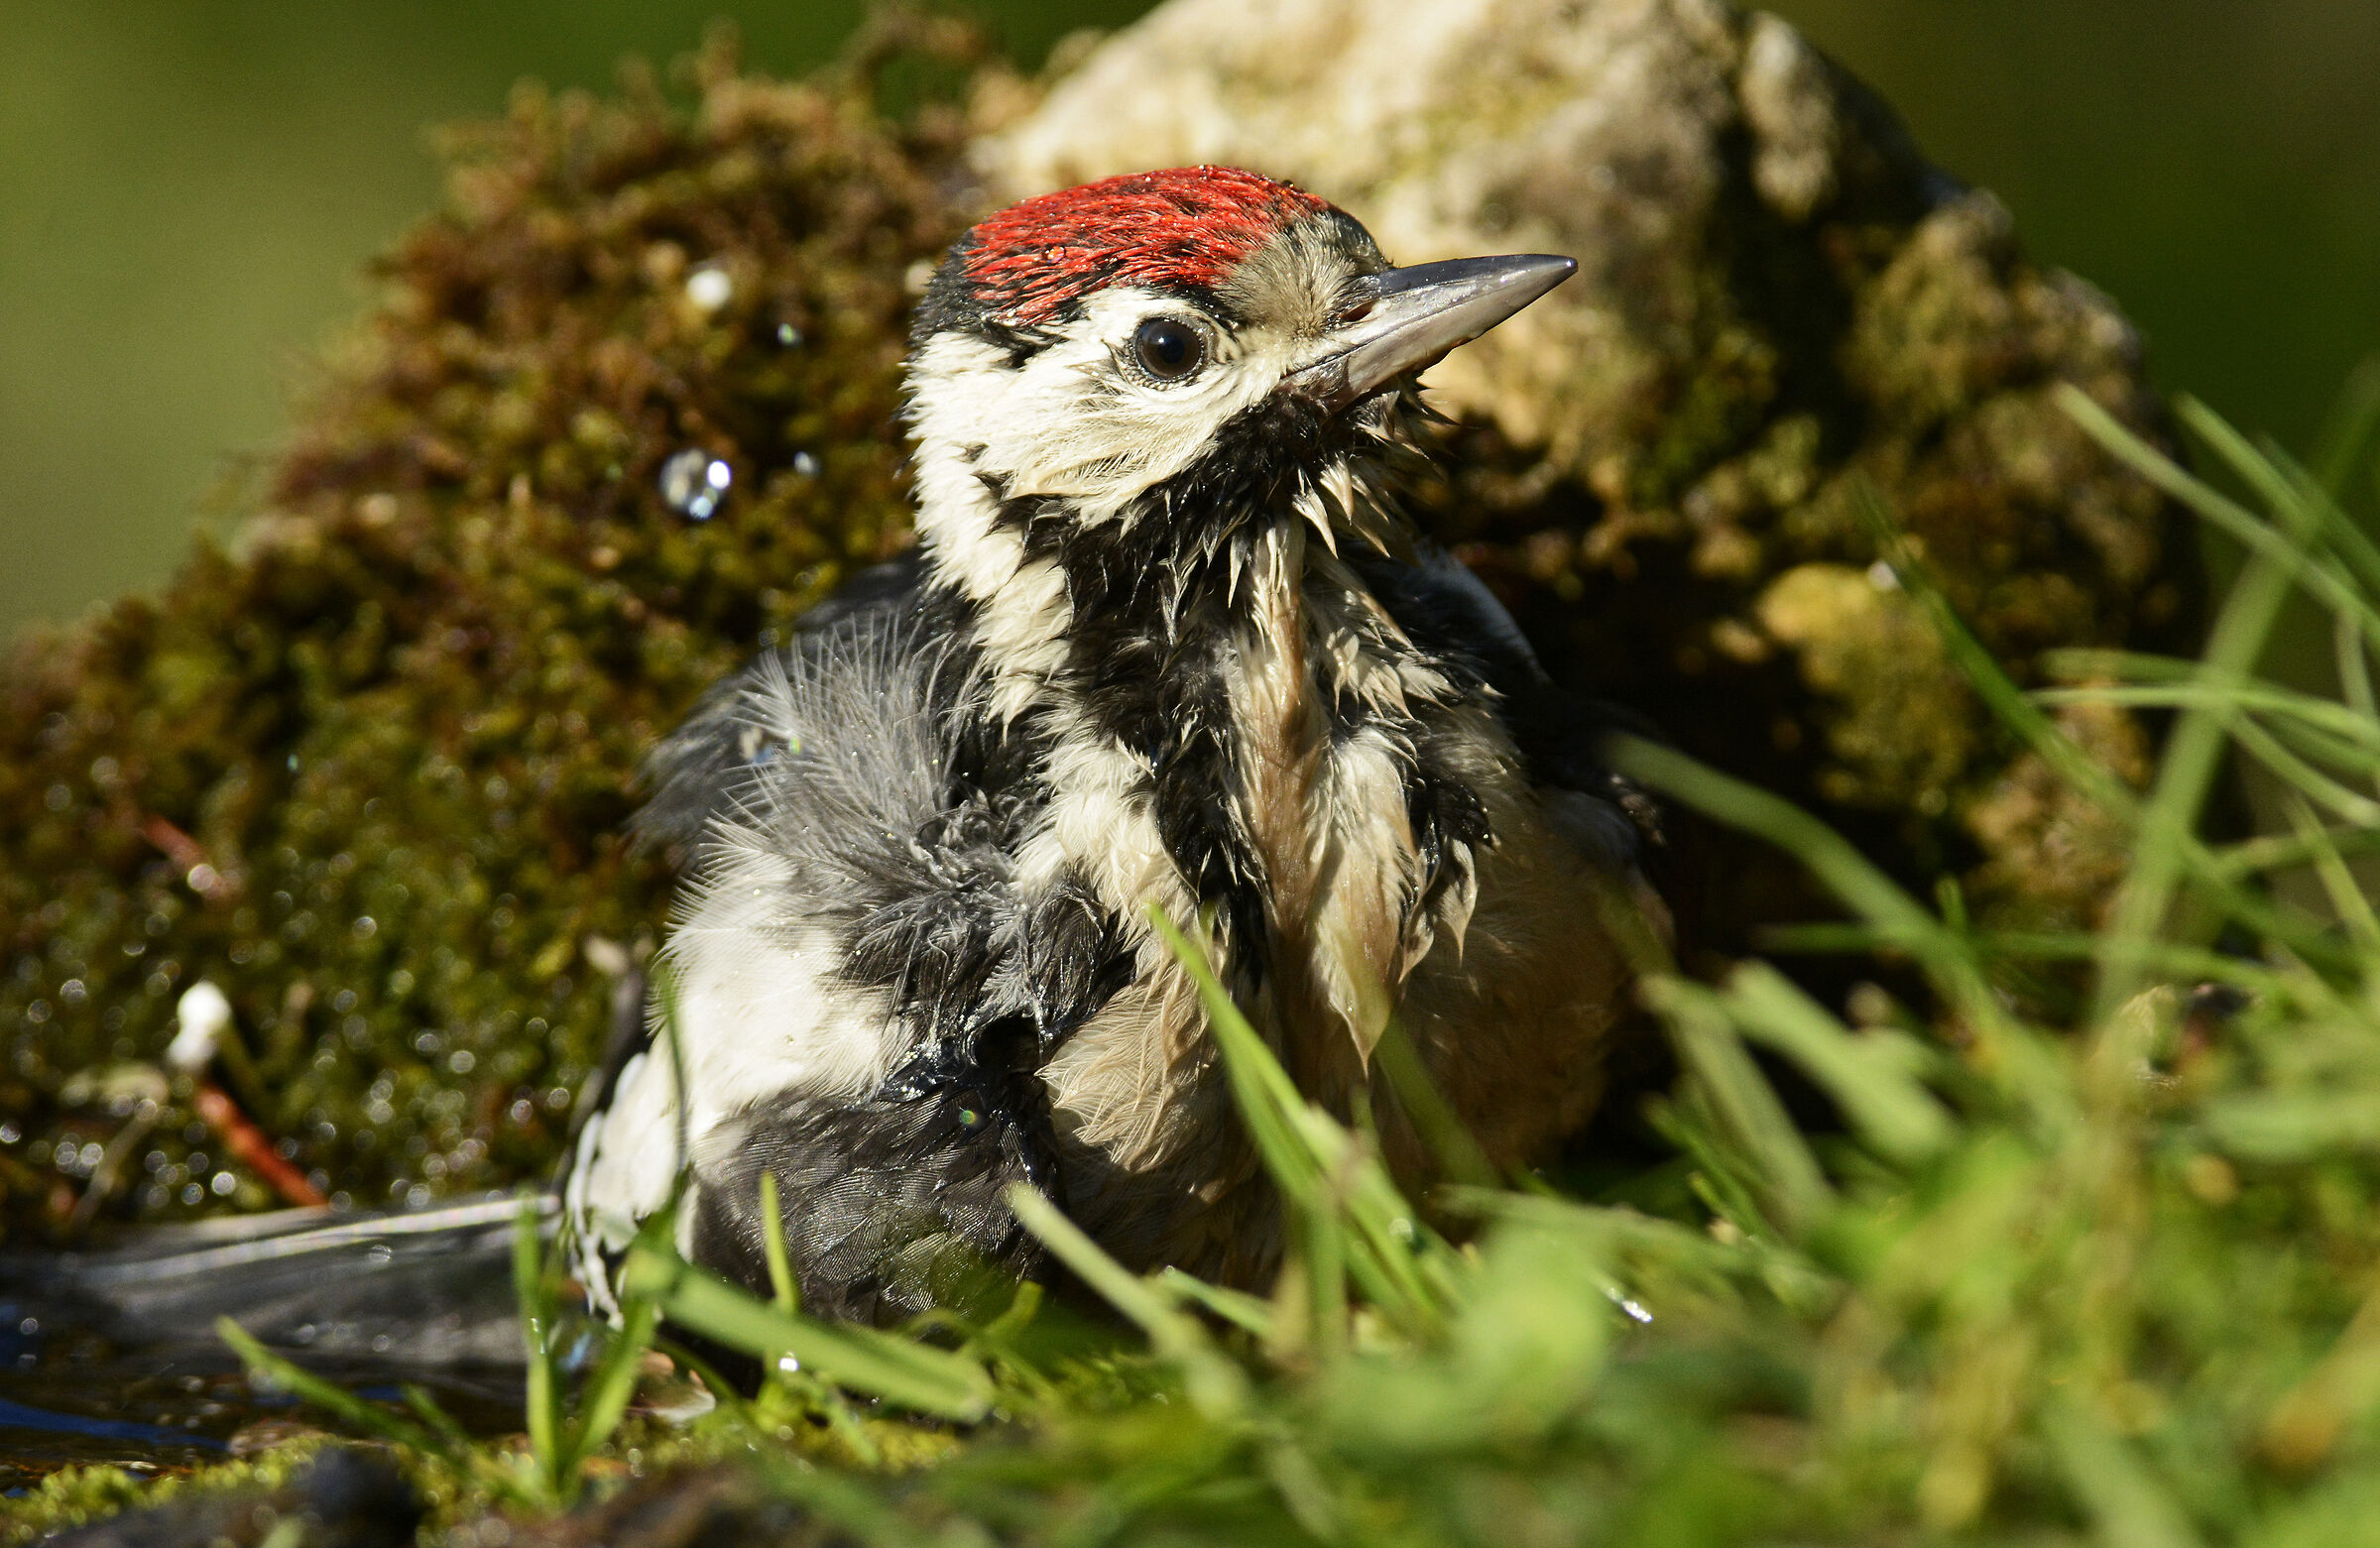 The Bath of the Red Woodpecker...